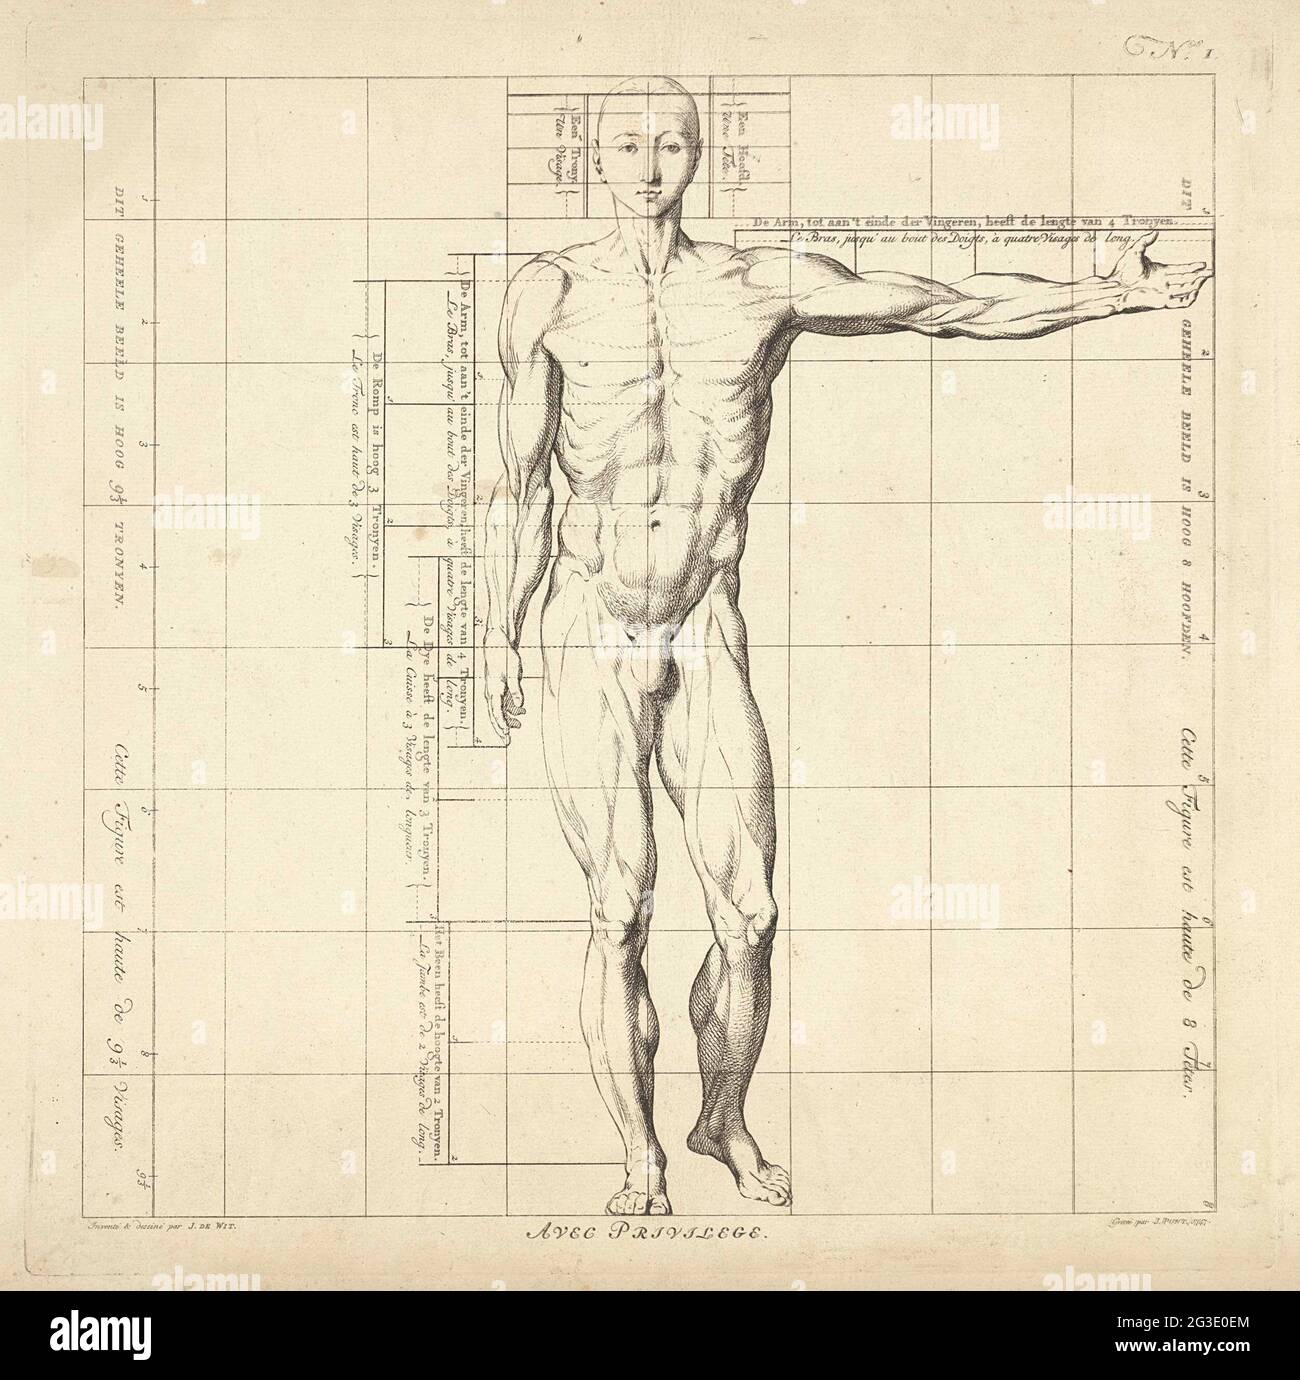 https://c8.alamy.com/comp/2G3E0EM/proportion-studie-from-the-body-of-a-man-county-book-of-the-proportions-of-t-menschelyke-ligham-proportions-du-corps-humain-front-view-with-one-outstretched-arm-2G3E0EM.jpg